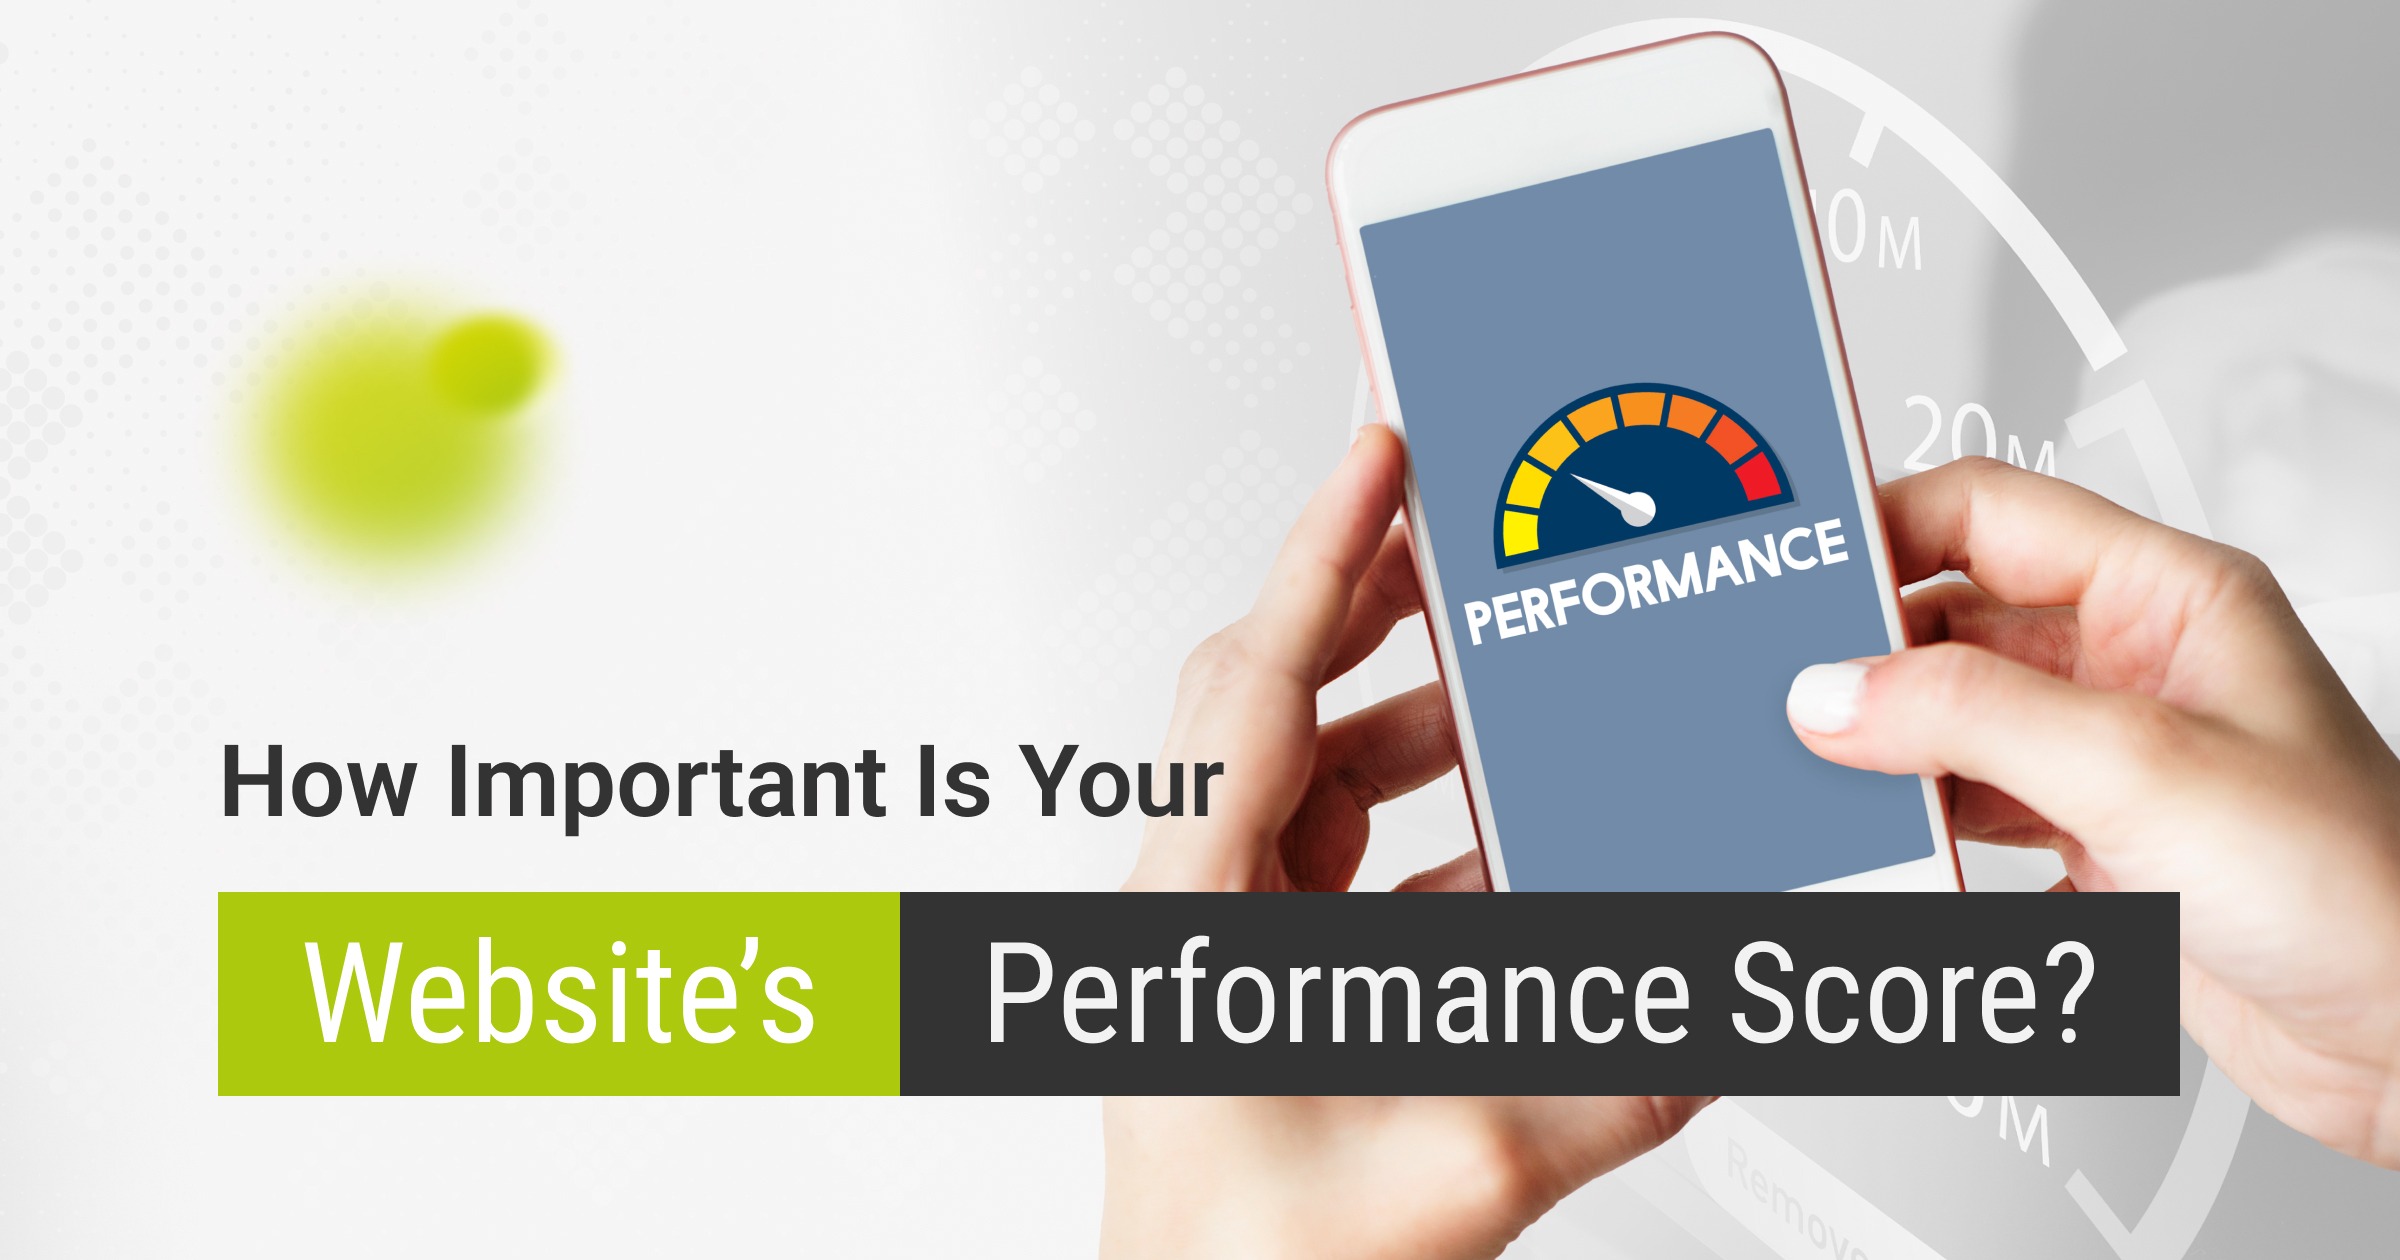 Does Your Website's Performance Score Really Matter?